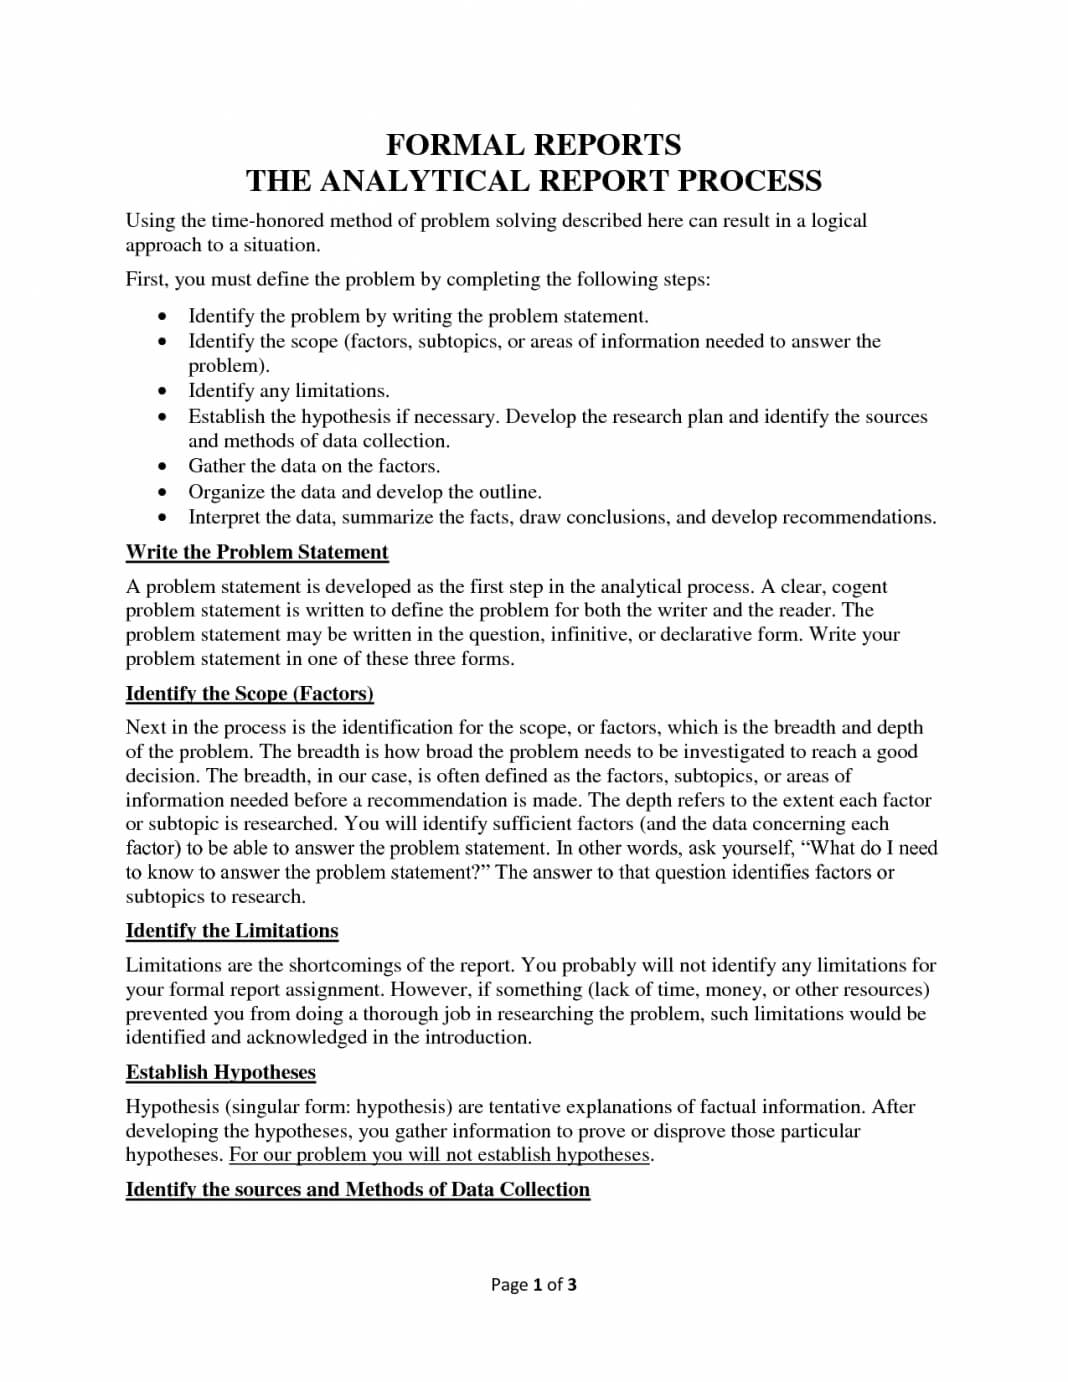 Examples Of Professional Business Reports West Roanoke Pertaining To Analytical Report Template